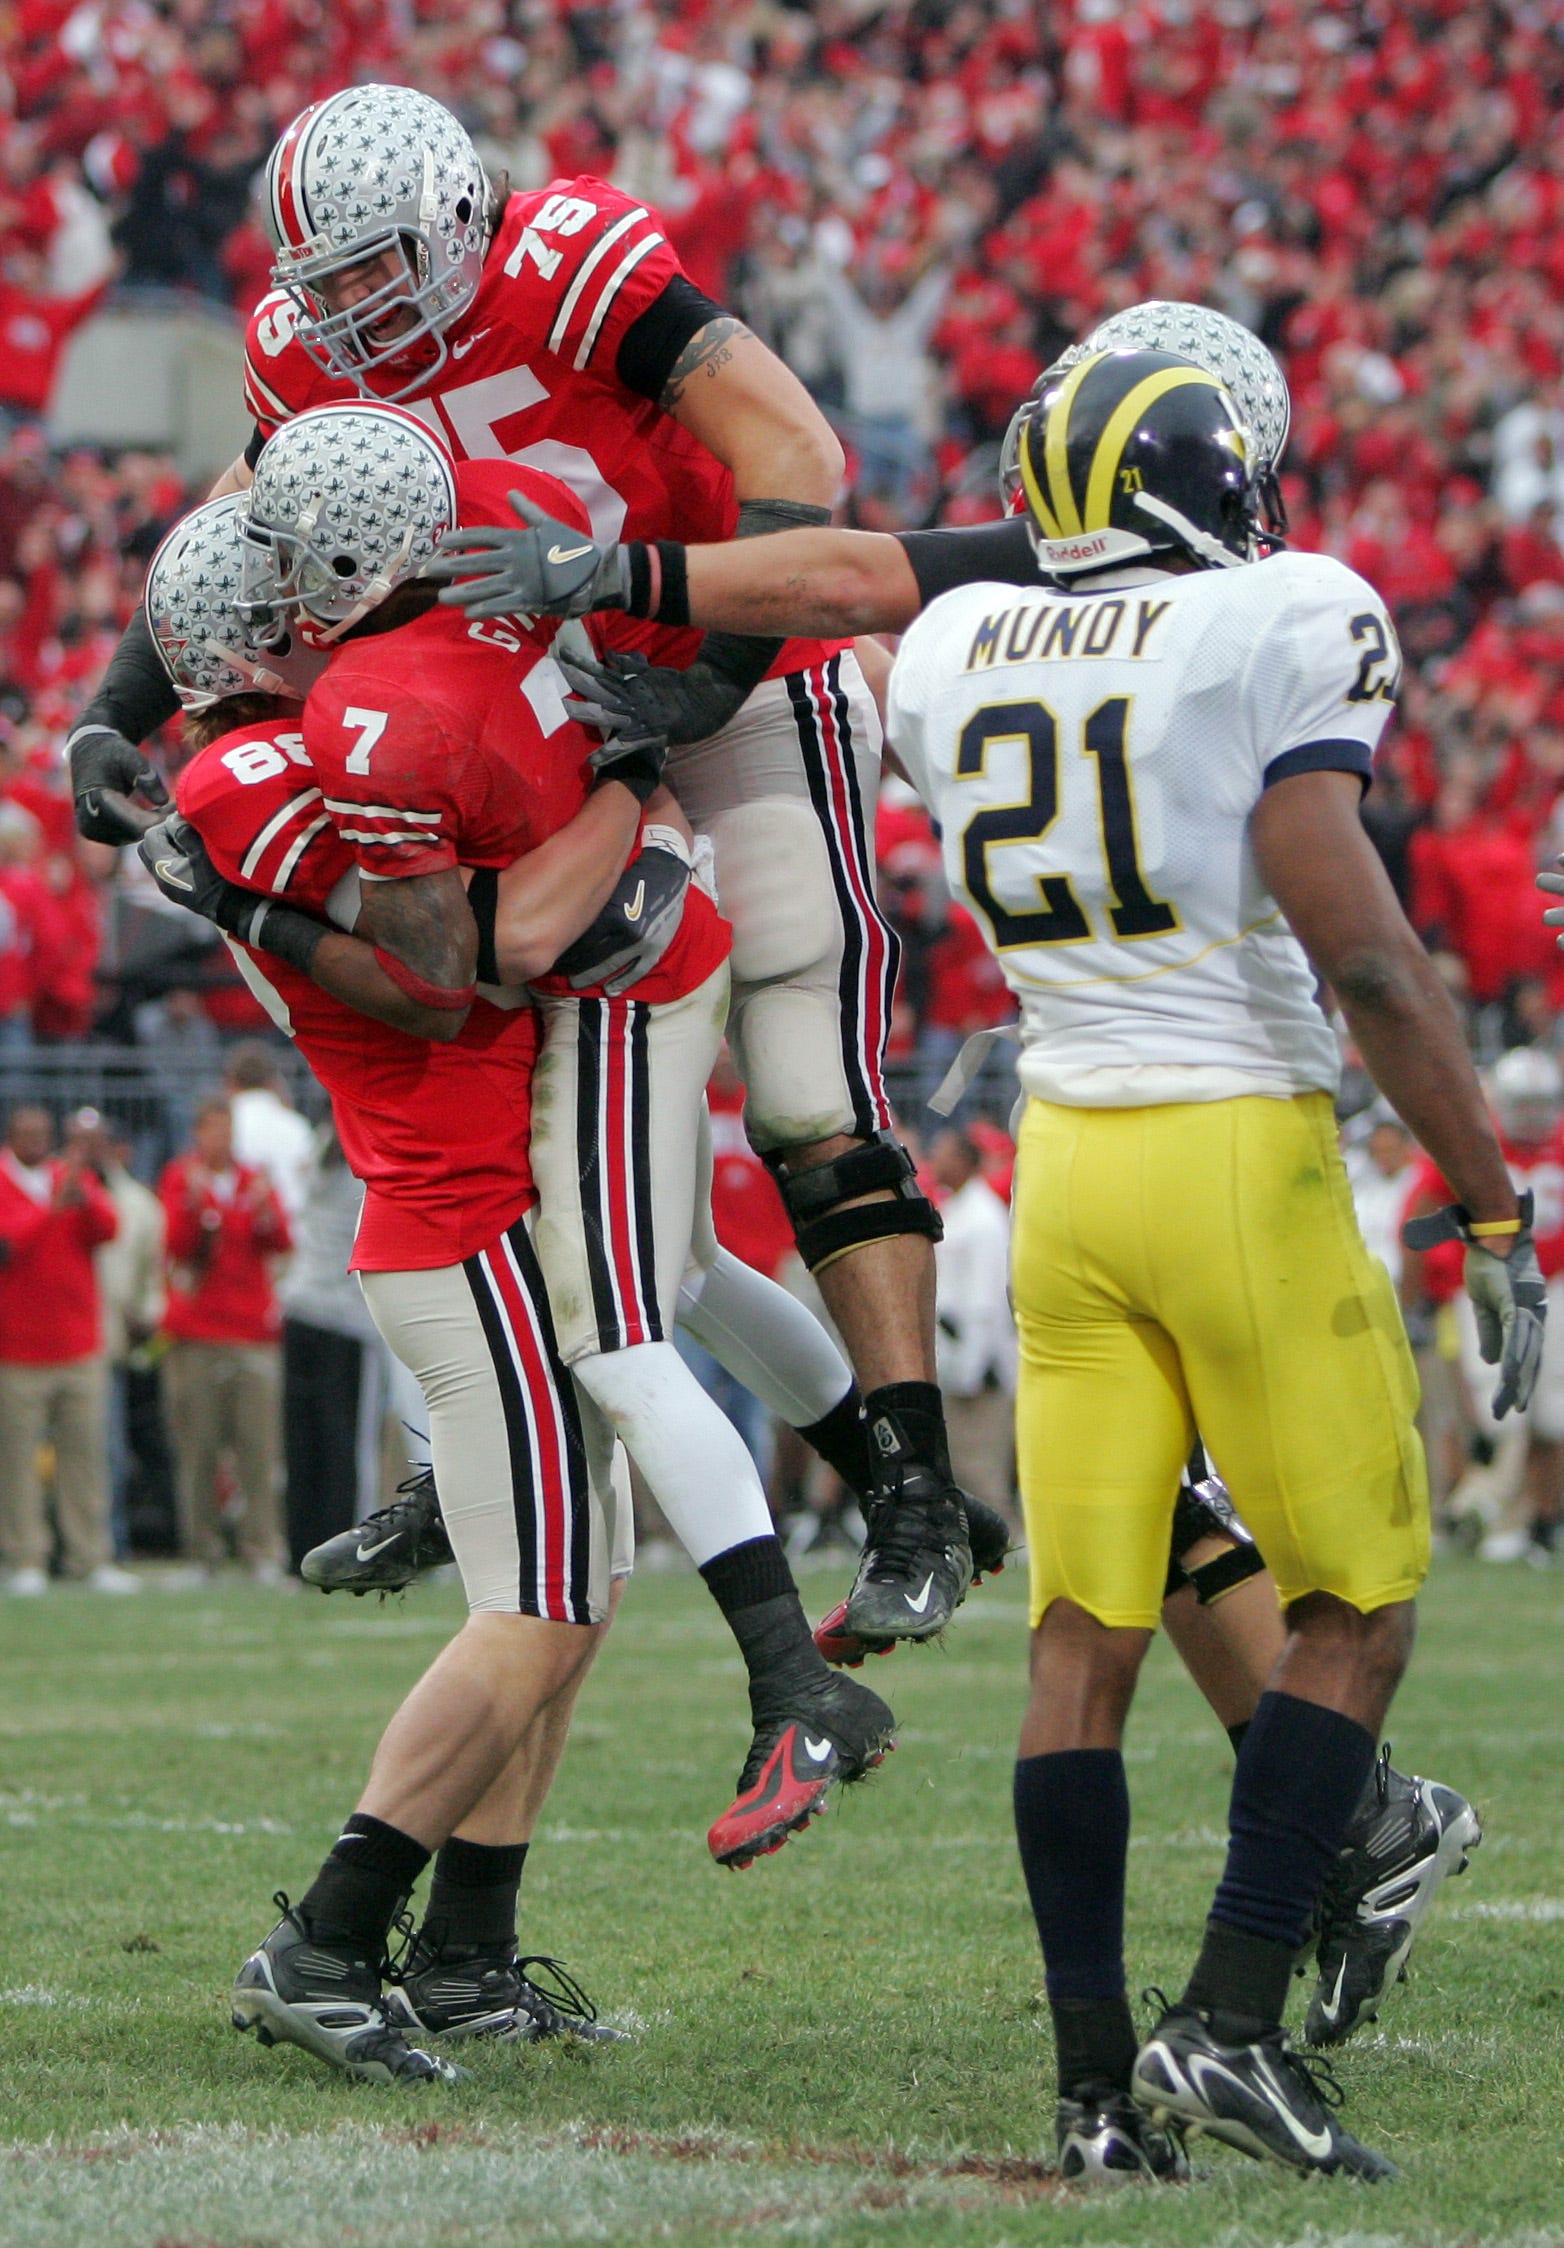 Ohio State's Rory Nicol, 88, lifts Ted Ginn Jr., 7, as Alex Boone, 75, join in to celebrate Ginn's touchdown against Michigan in the first half of their game at the Ohio Stadium, November 18, 2006.  (Dispatch photo by Neal C. Lauron)